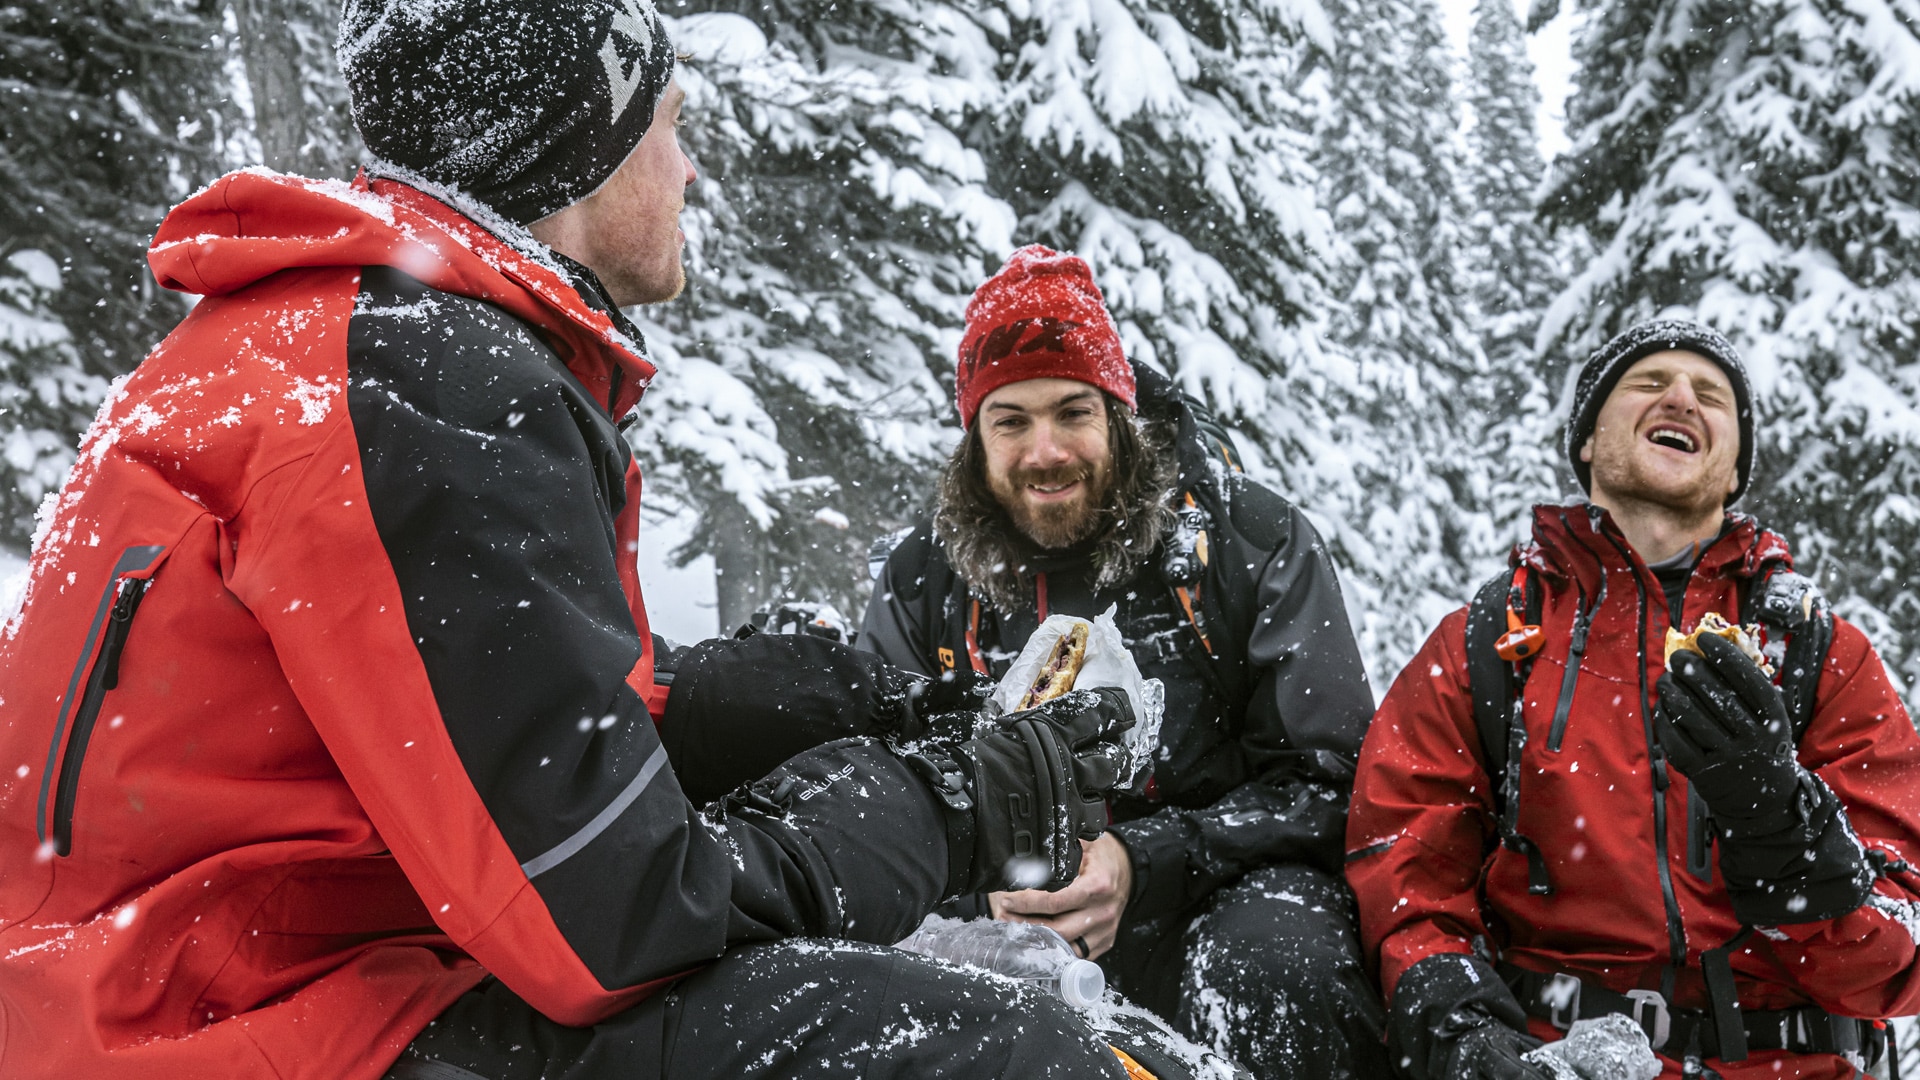 Group of Lynx riders enjoying a meal in the backcountry